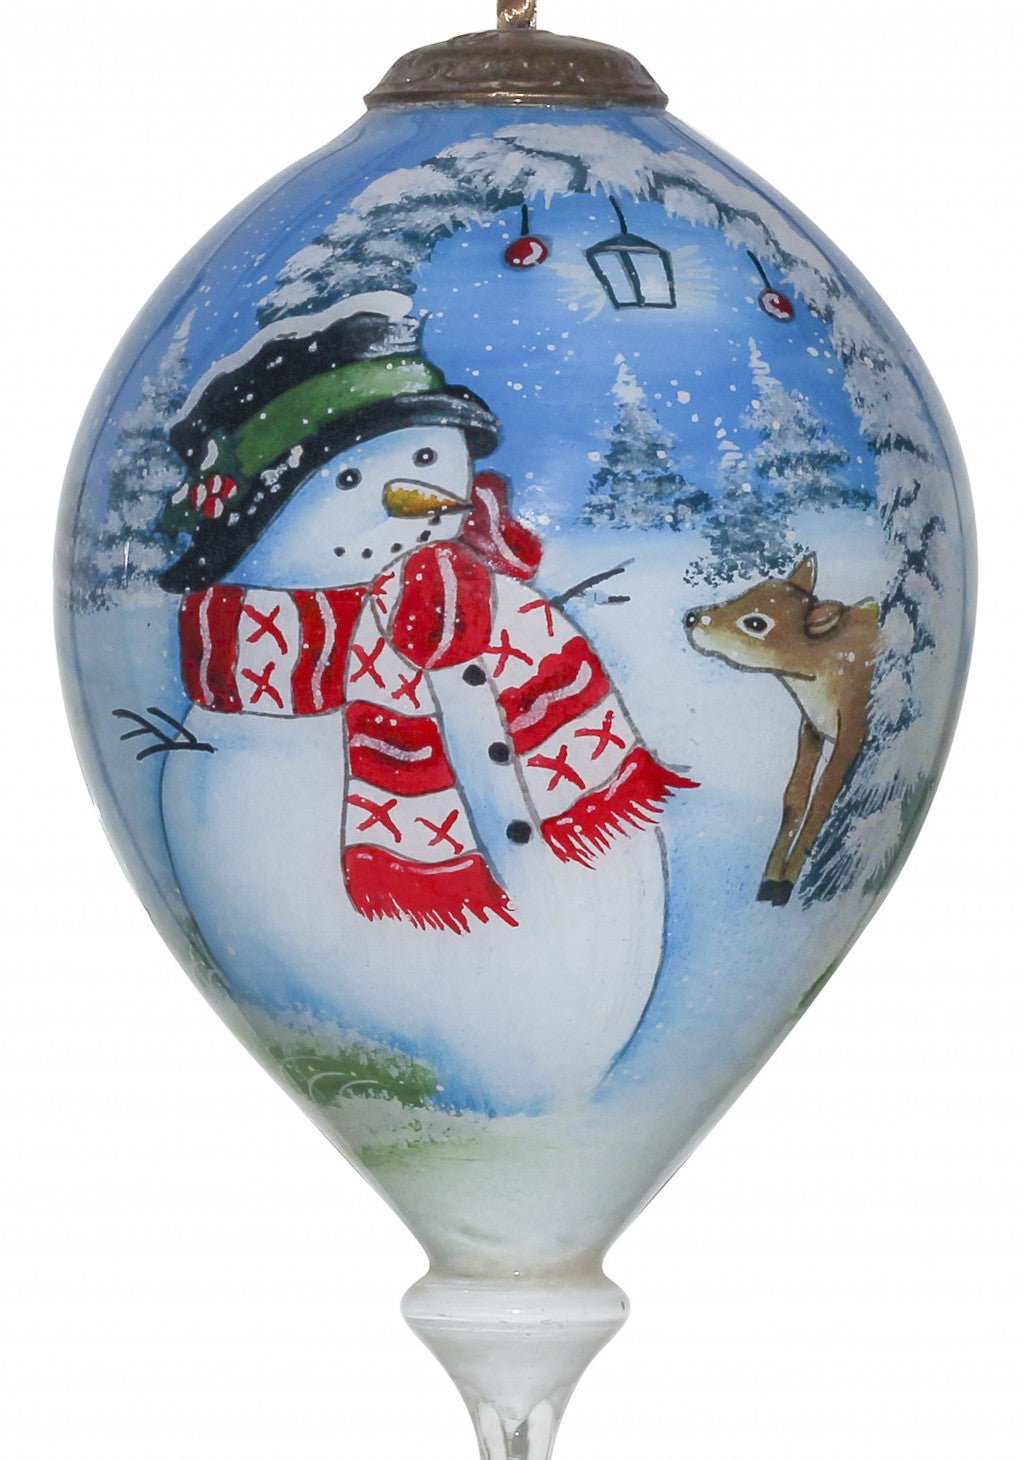 Adorable-Snowman-and-Deer-Hand-Painted-Mouth-Blown-Glass-Ornament-Christmas-Ornaments